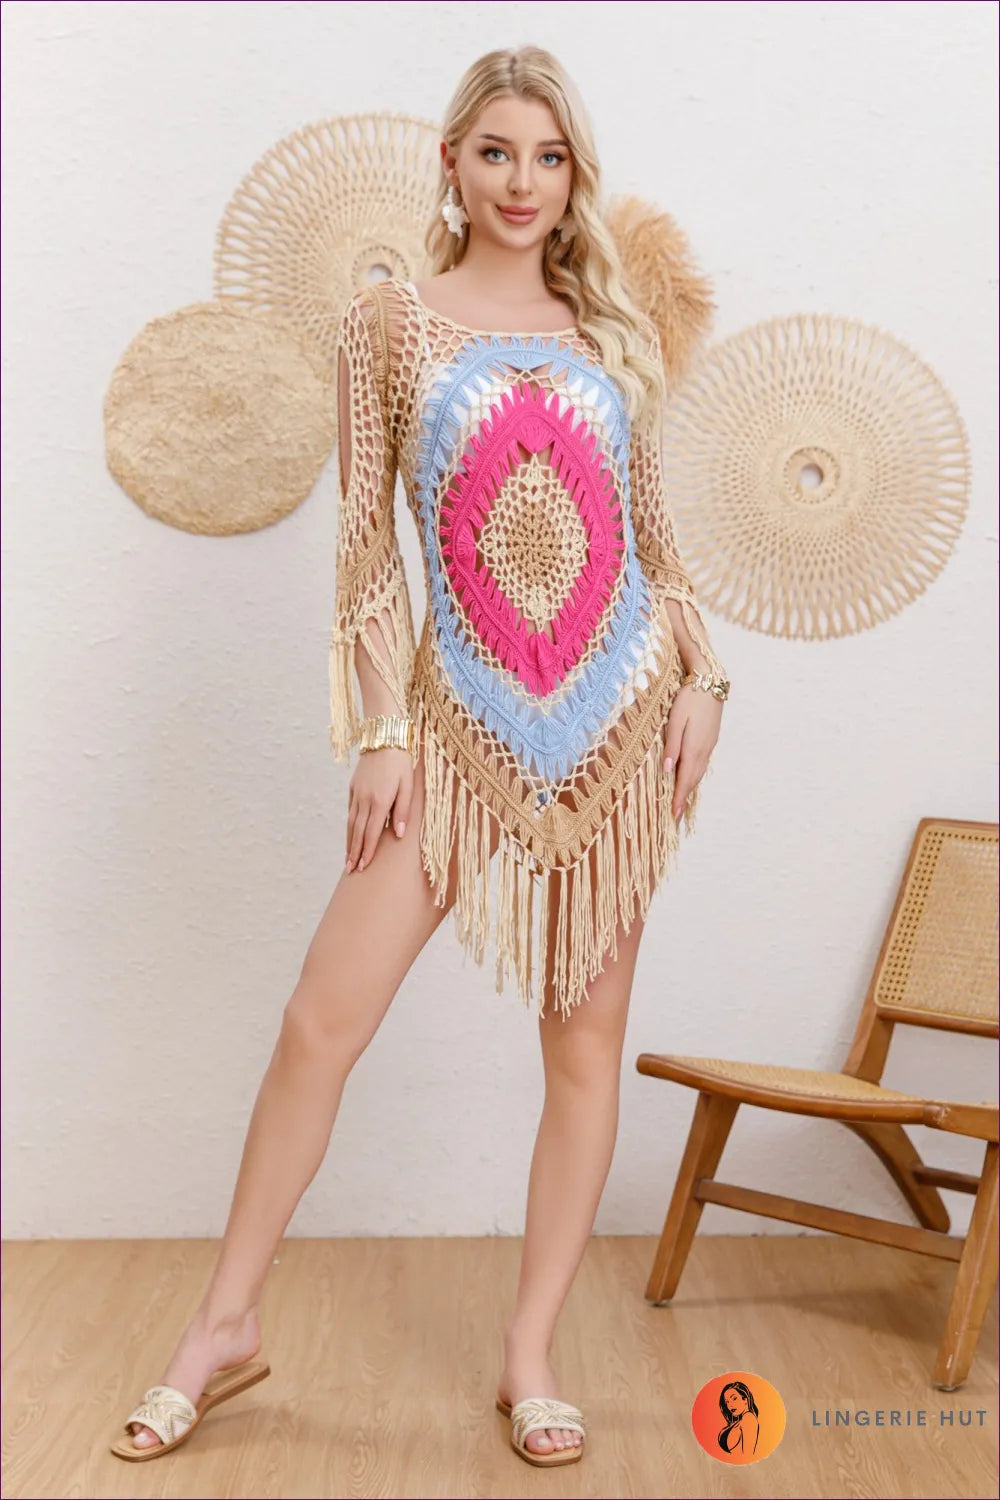 Beach Cover Up - Vibrant And Sexy For Beachwear, Up, Dress, Vaccation